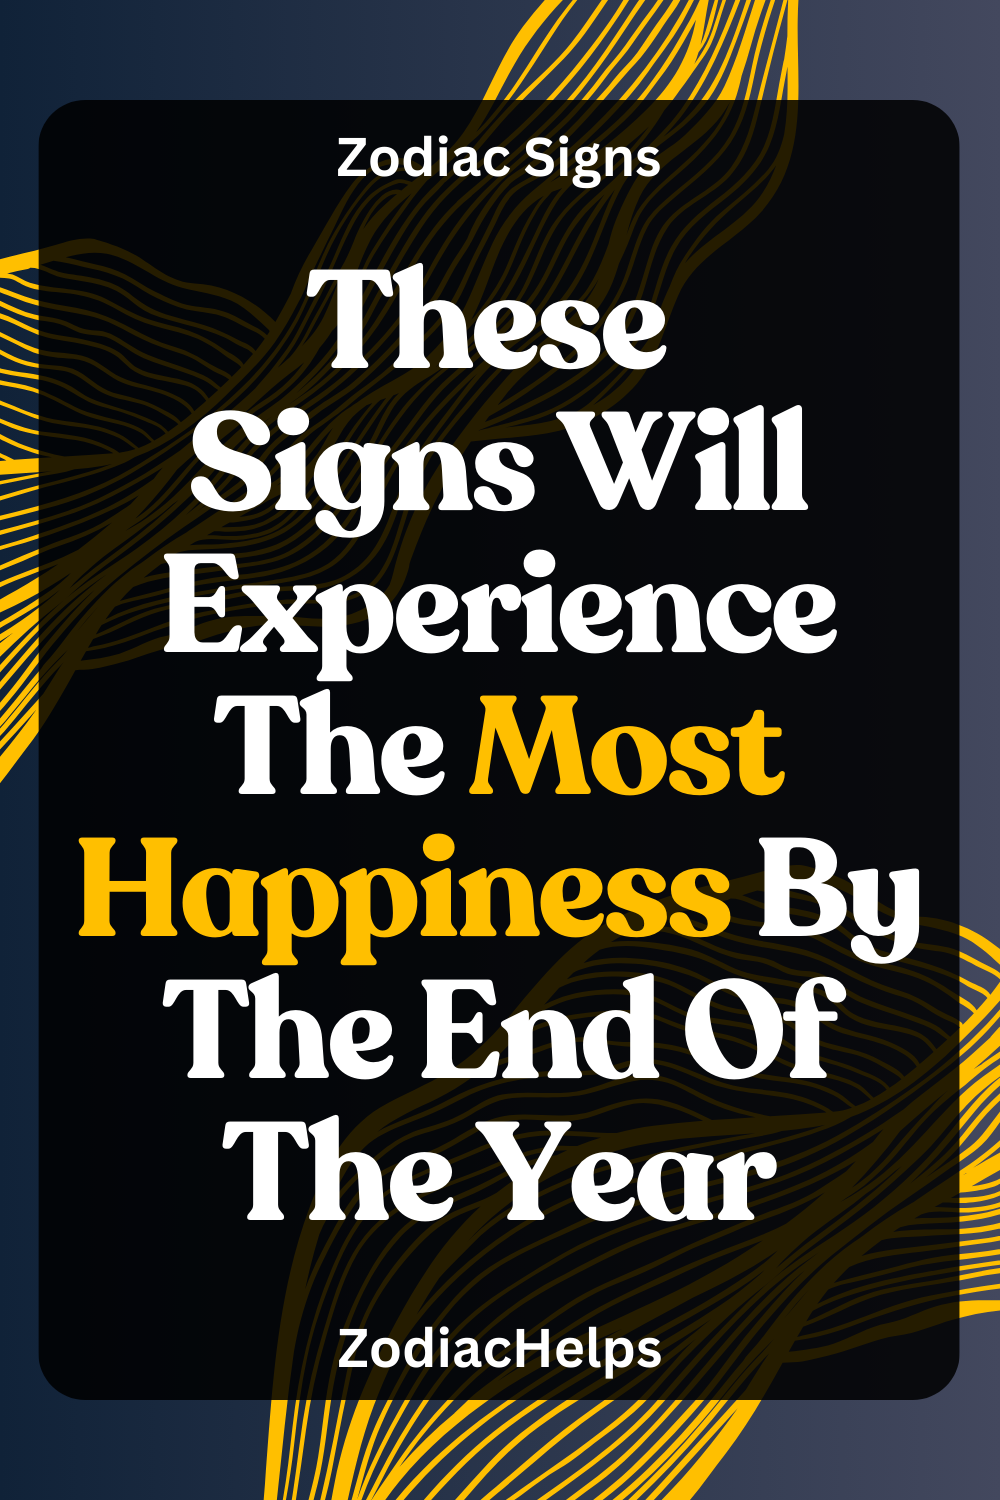 These Signs Will Experience The Most Happiness By The End Of The Year